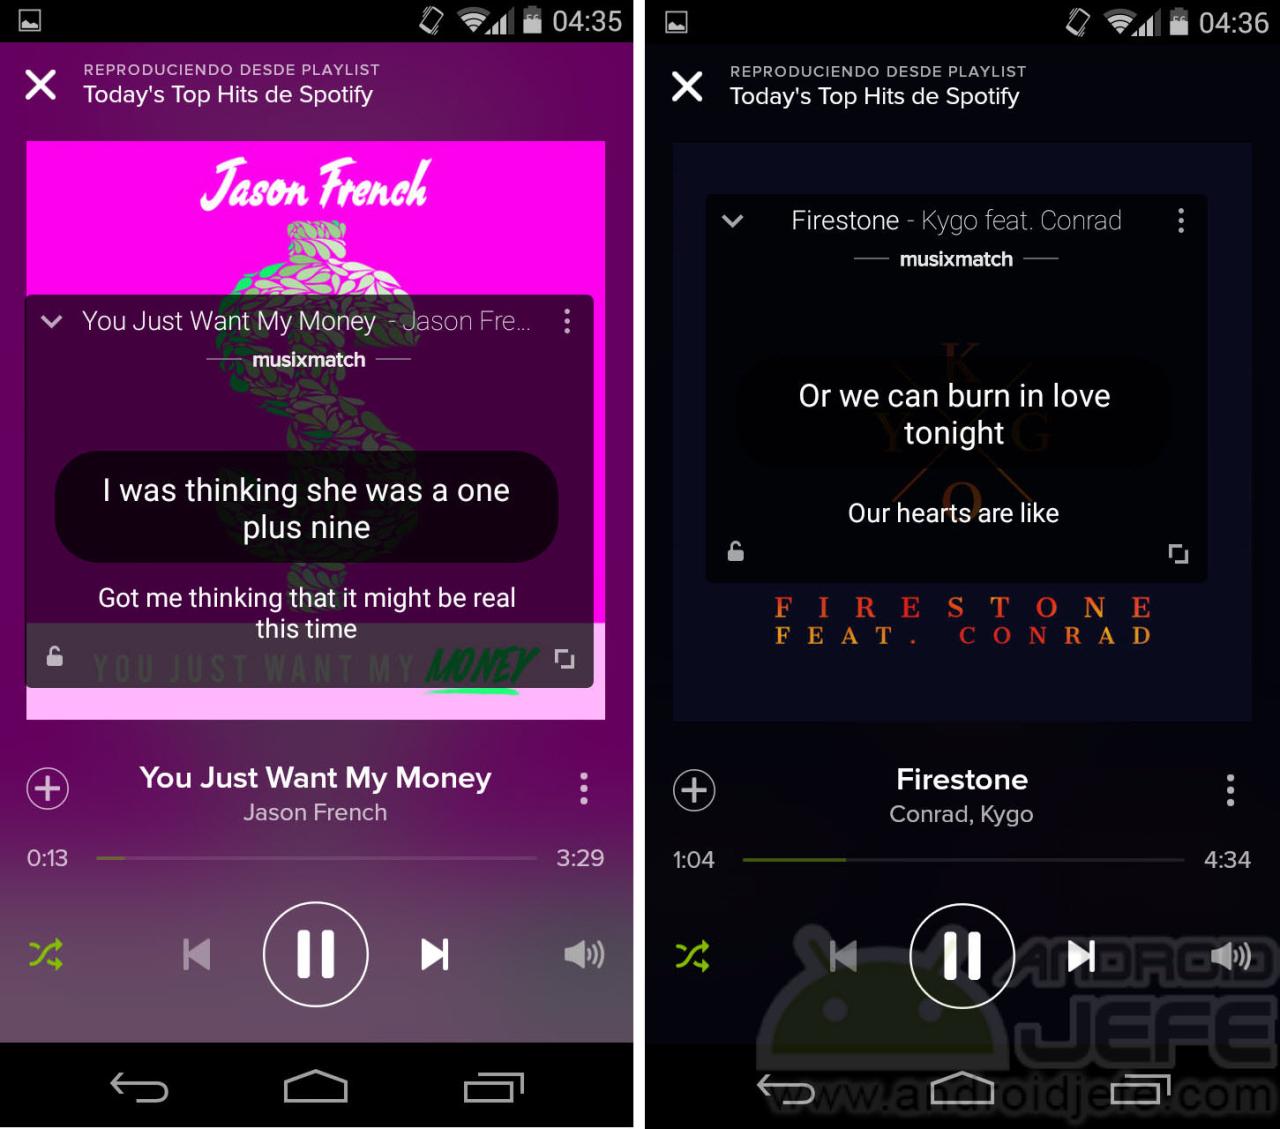 Spotify-Songtexte für Android